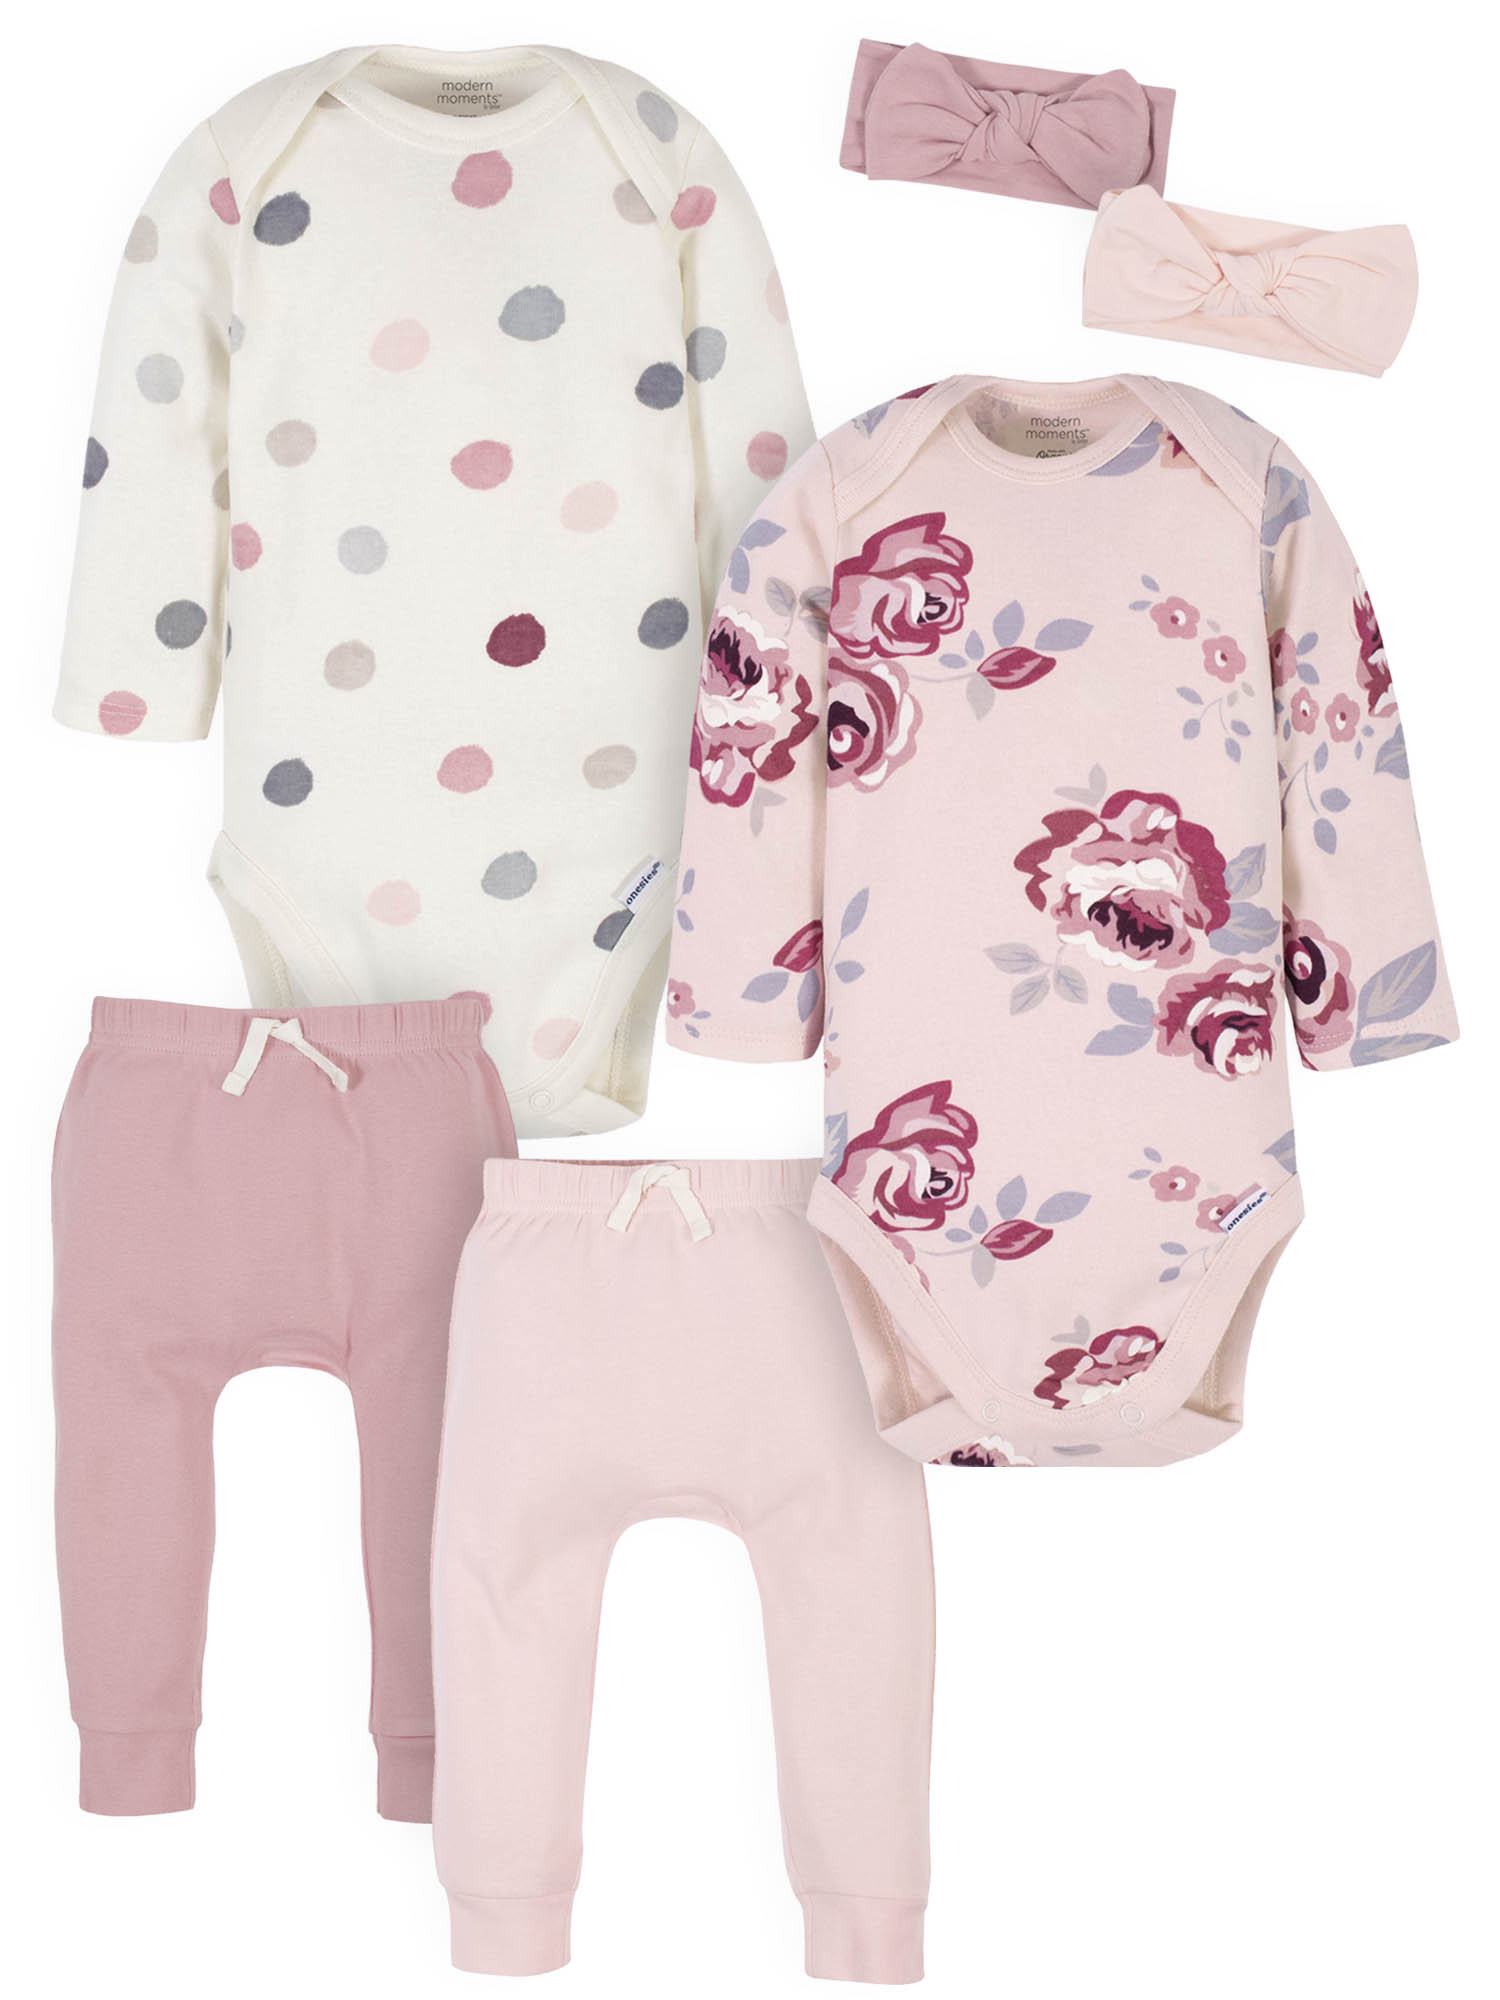 Modern Moments by Gerber Newborn Baby Girl Long Sleeve Bodysuit & Pant Outfit Sets, 6-Piece (Newborn-12 Months) - image 1 of 15